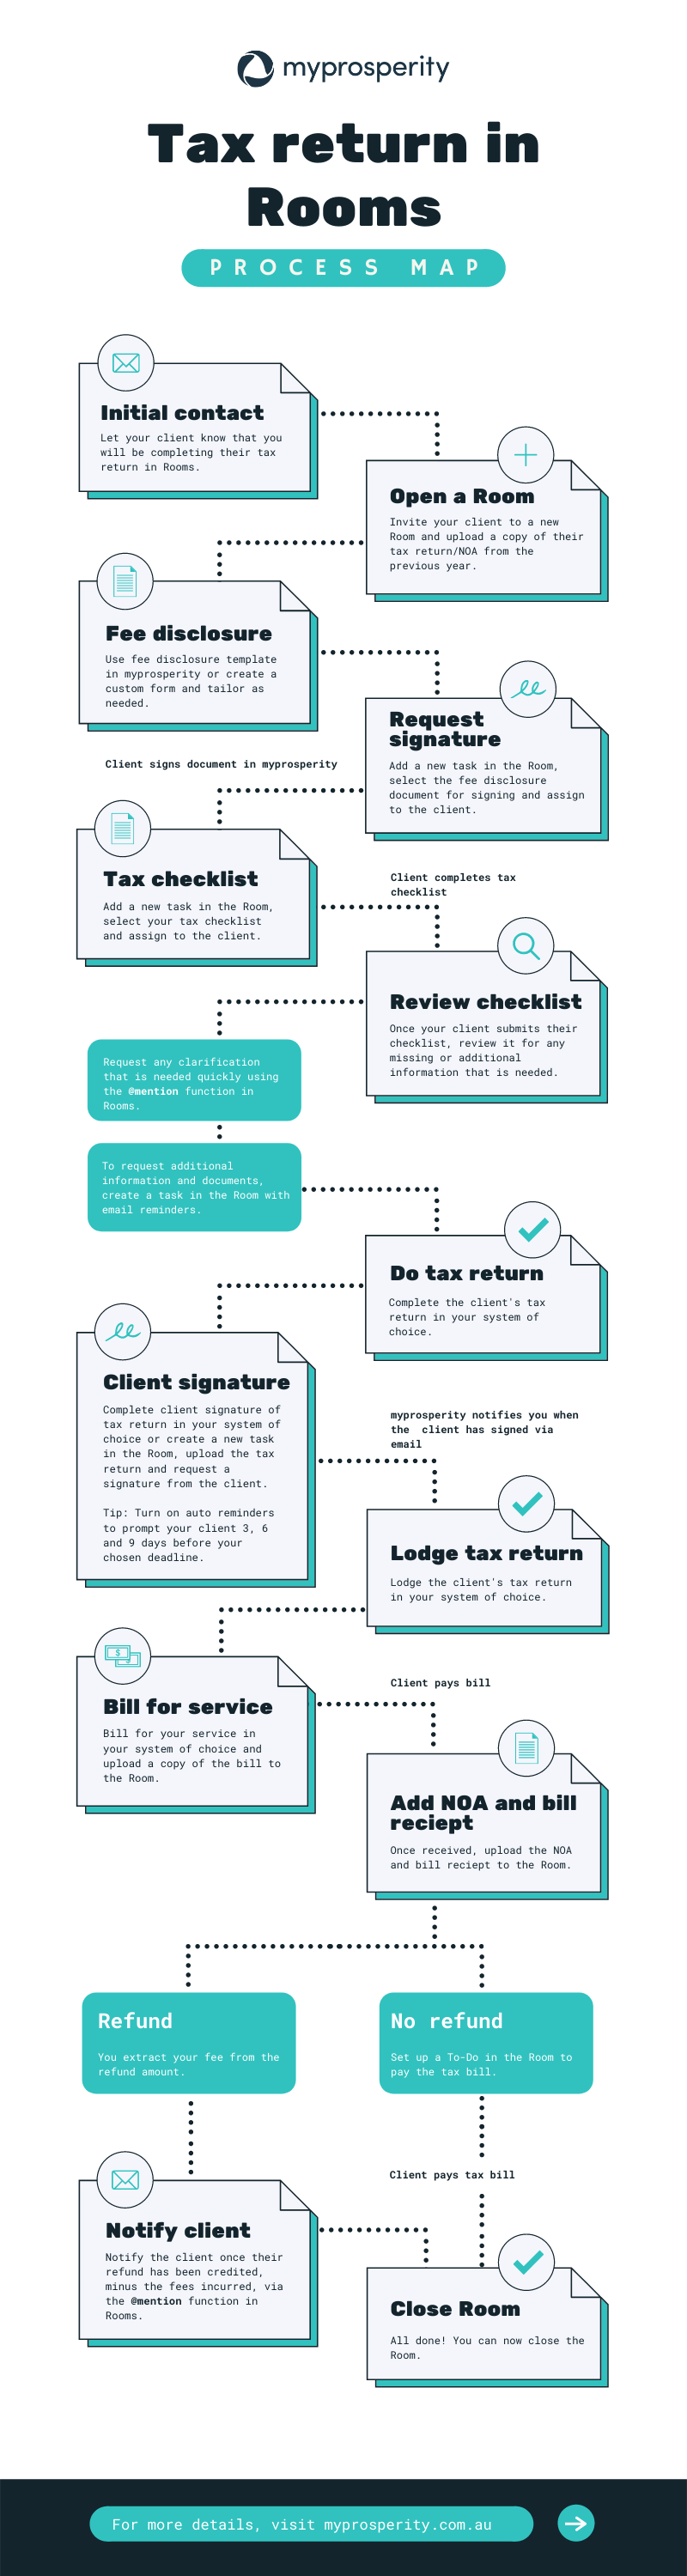 Tax_return_in_Rooms_process_map-2.png